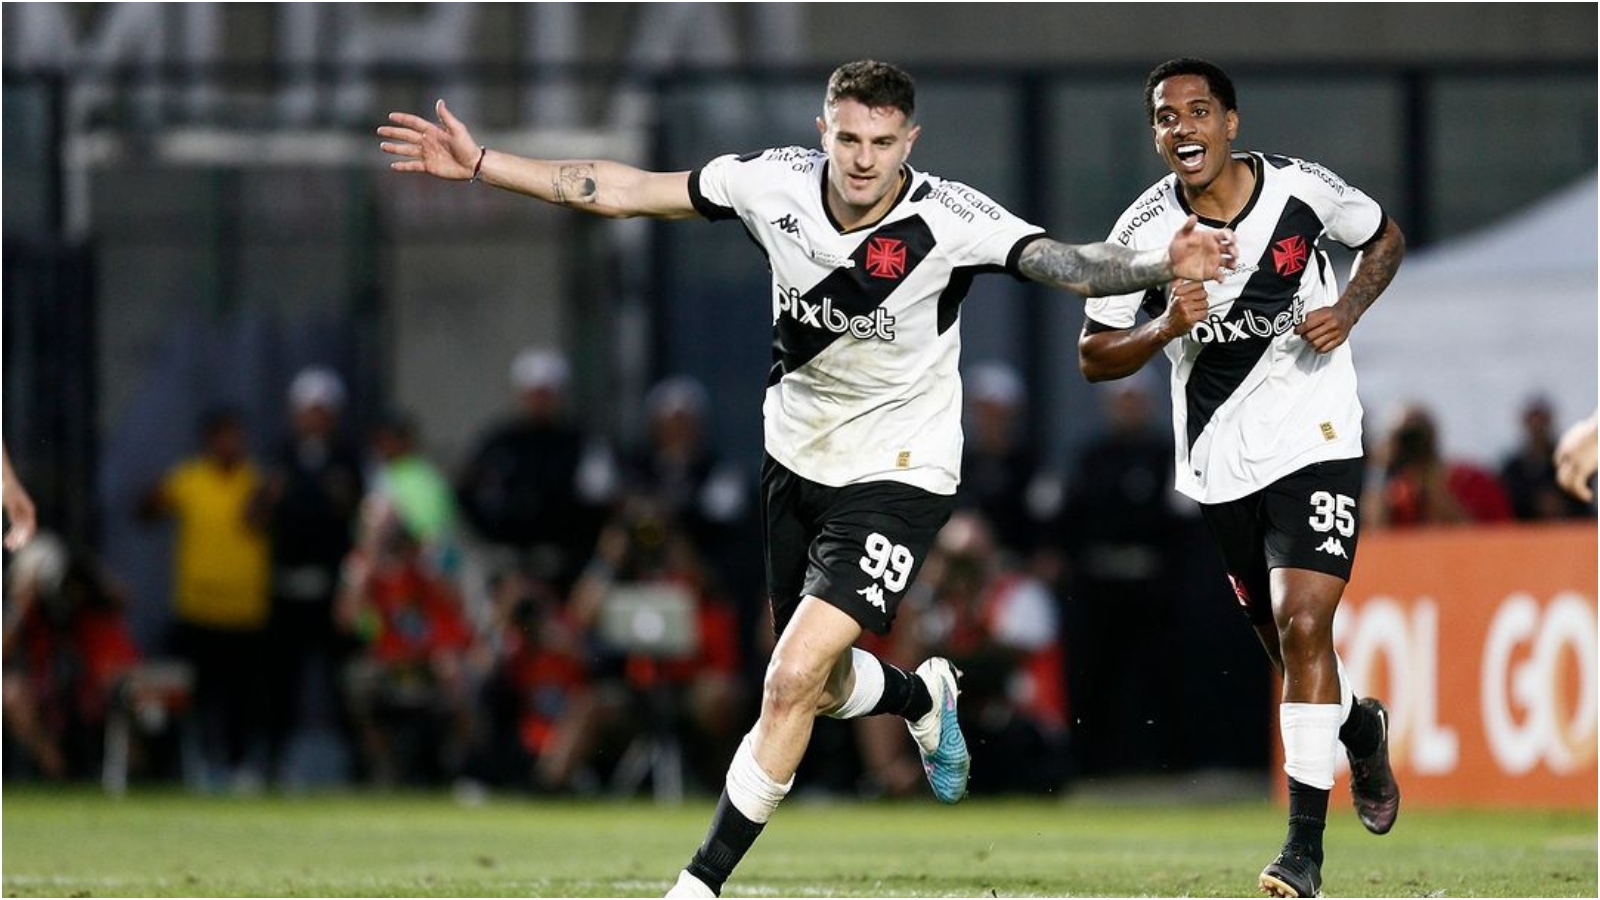 Debutant Vegetti scores, Vasco defeats Grêmio at home and ends fasts in the Brasileirão